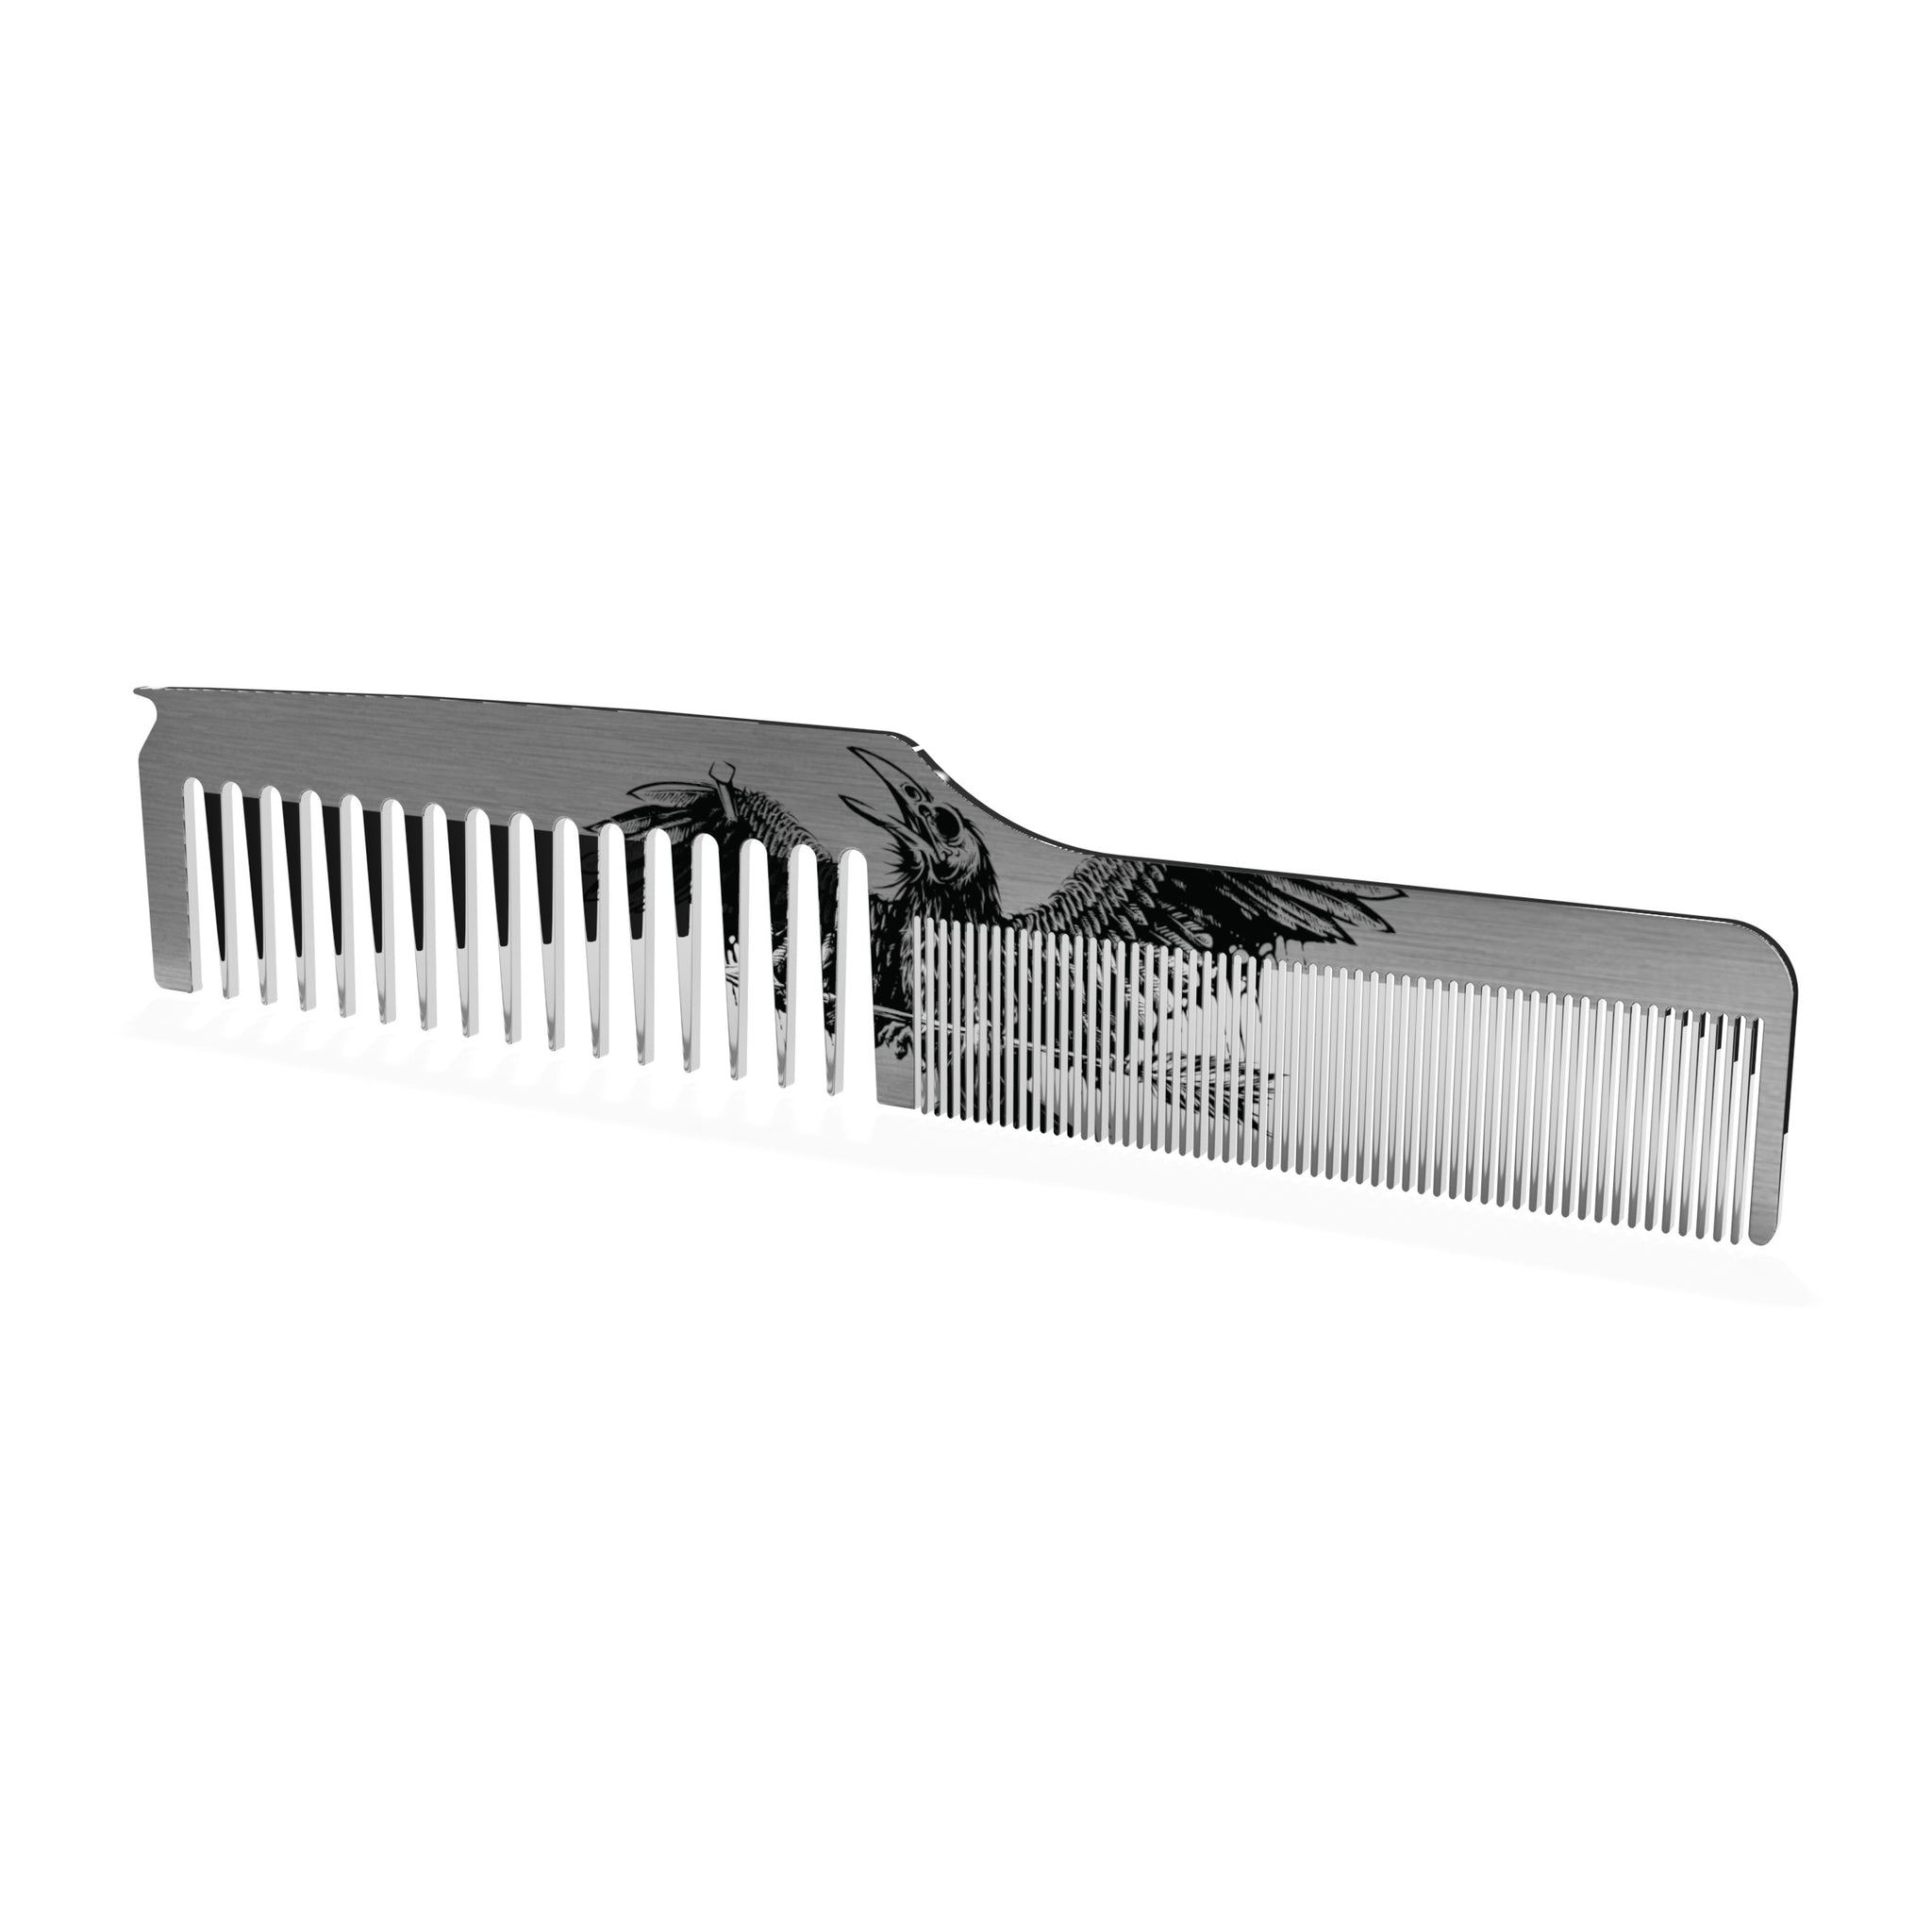 Raven Comb Hair Styling Hair Care